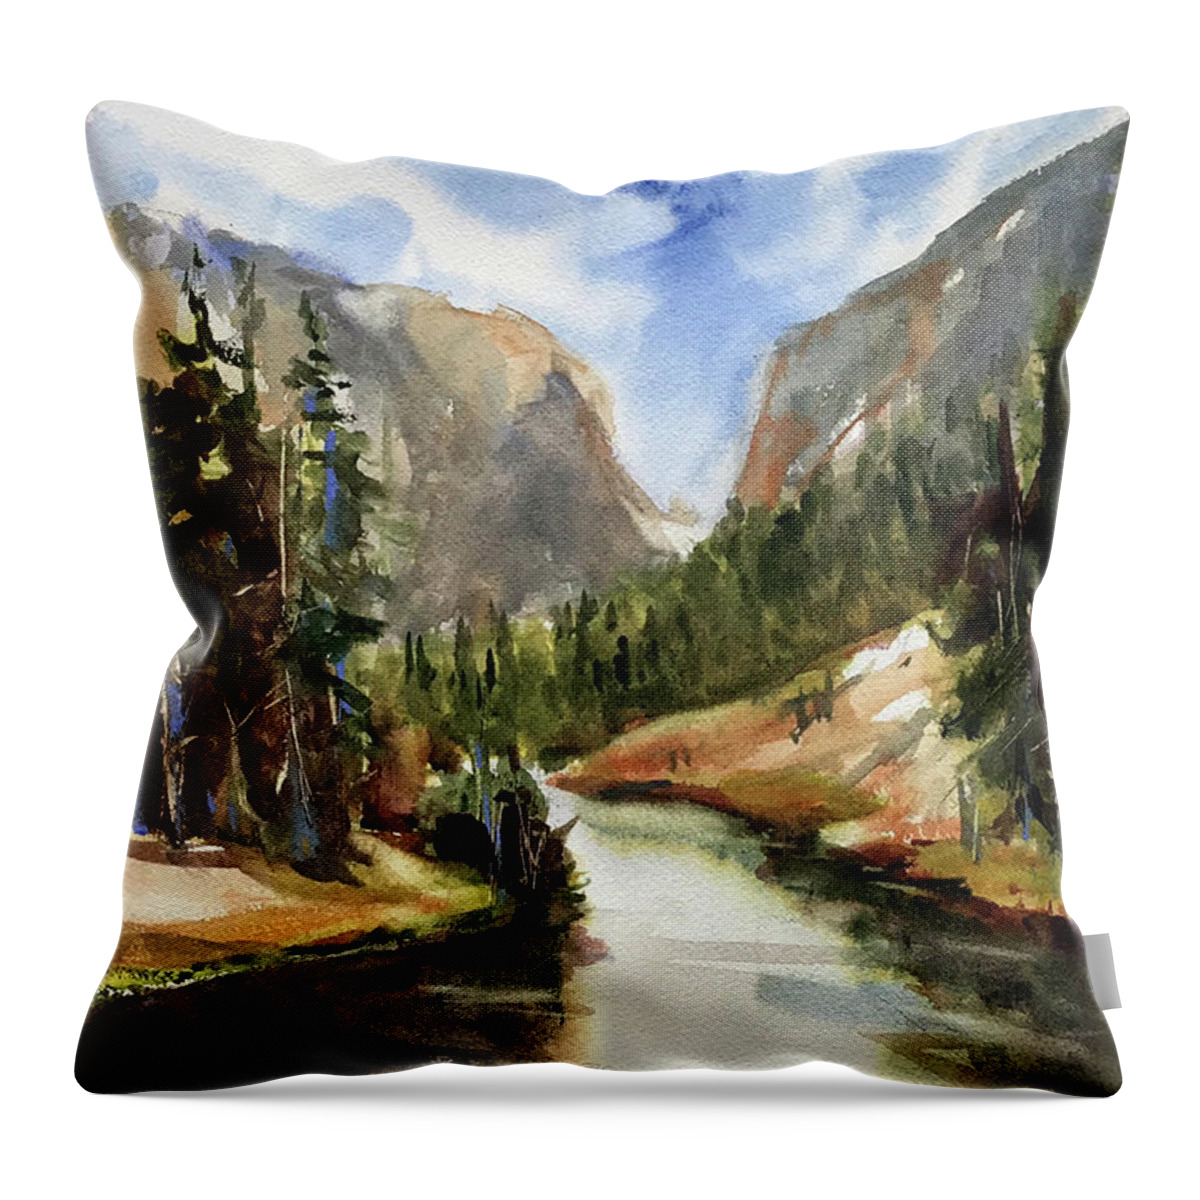 Colorado Throw Pillow featuring the painting Rocky Mountain High by Judith Levins